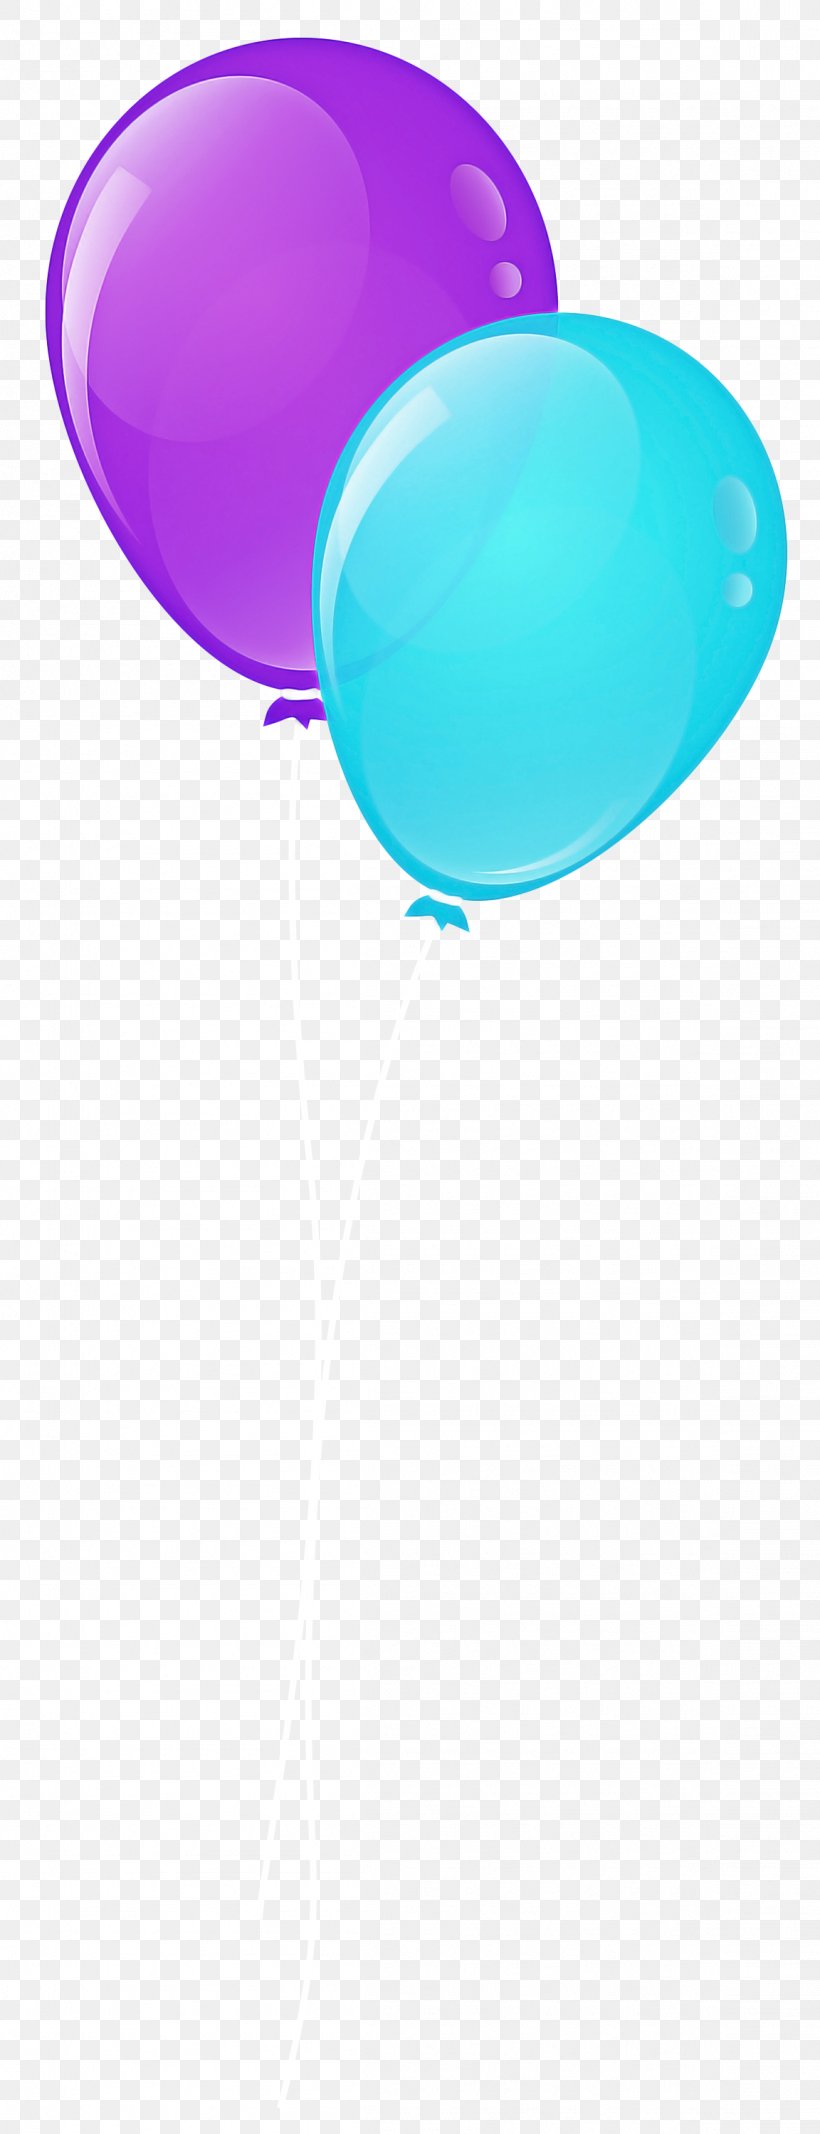 Blue Balloon, PNG, 1152x2999px, Balloon, Aqua, Blue, Material Property, Party Supply Download Free